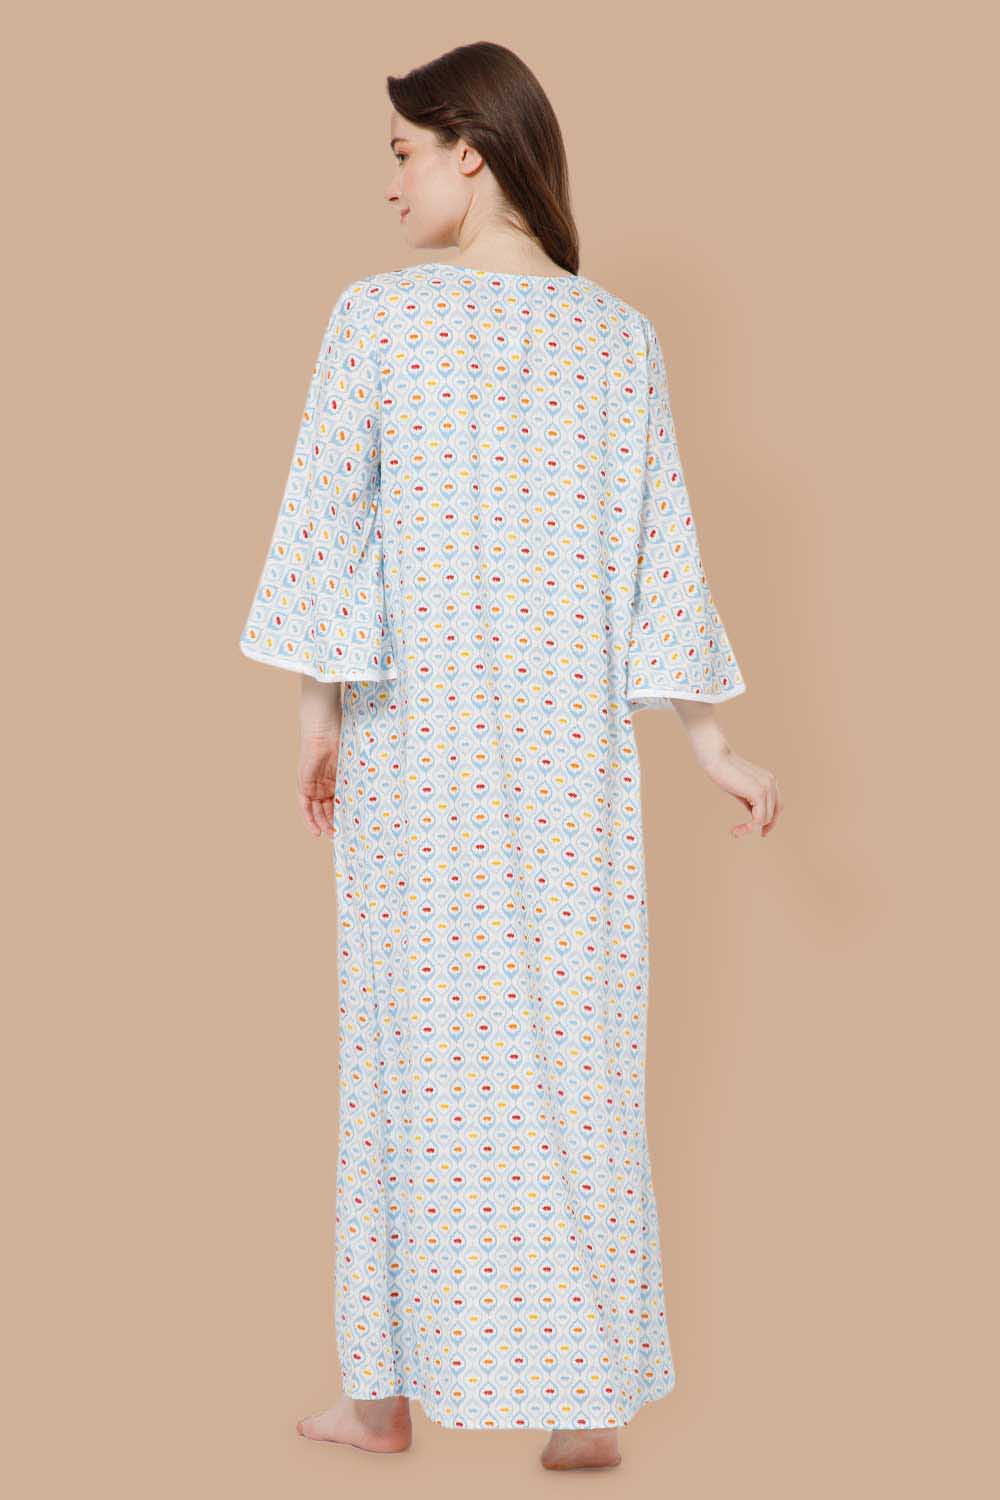 Naidu Hall V Neck Cotton Printed Nighty with Long Bell Sleeves - Sky Blue - NT40